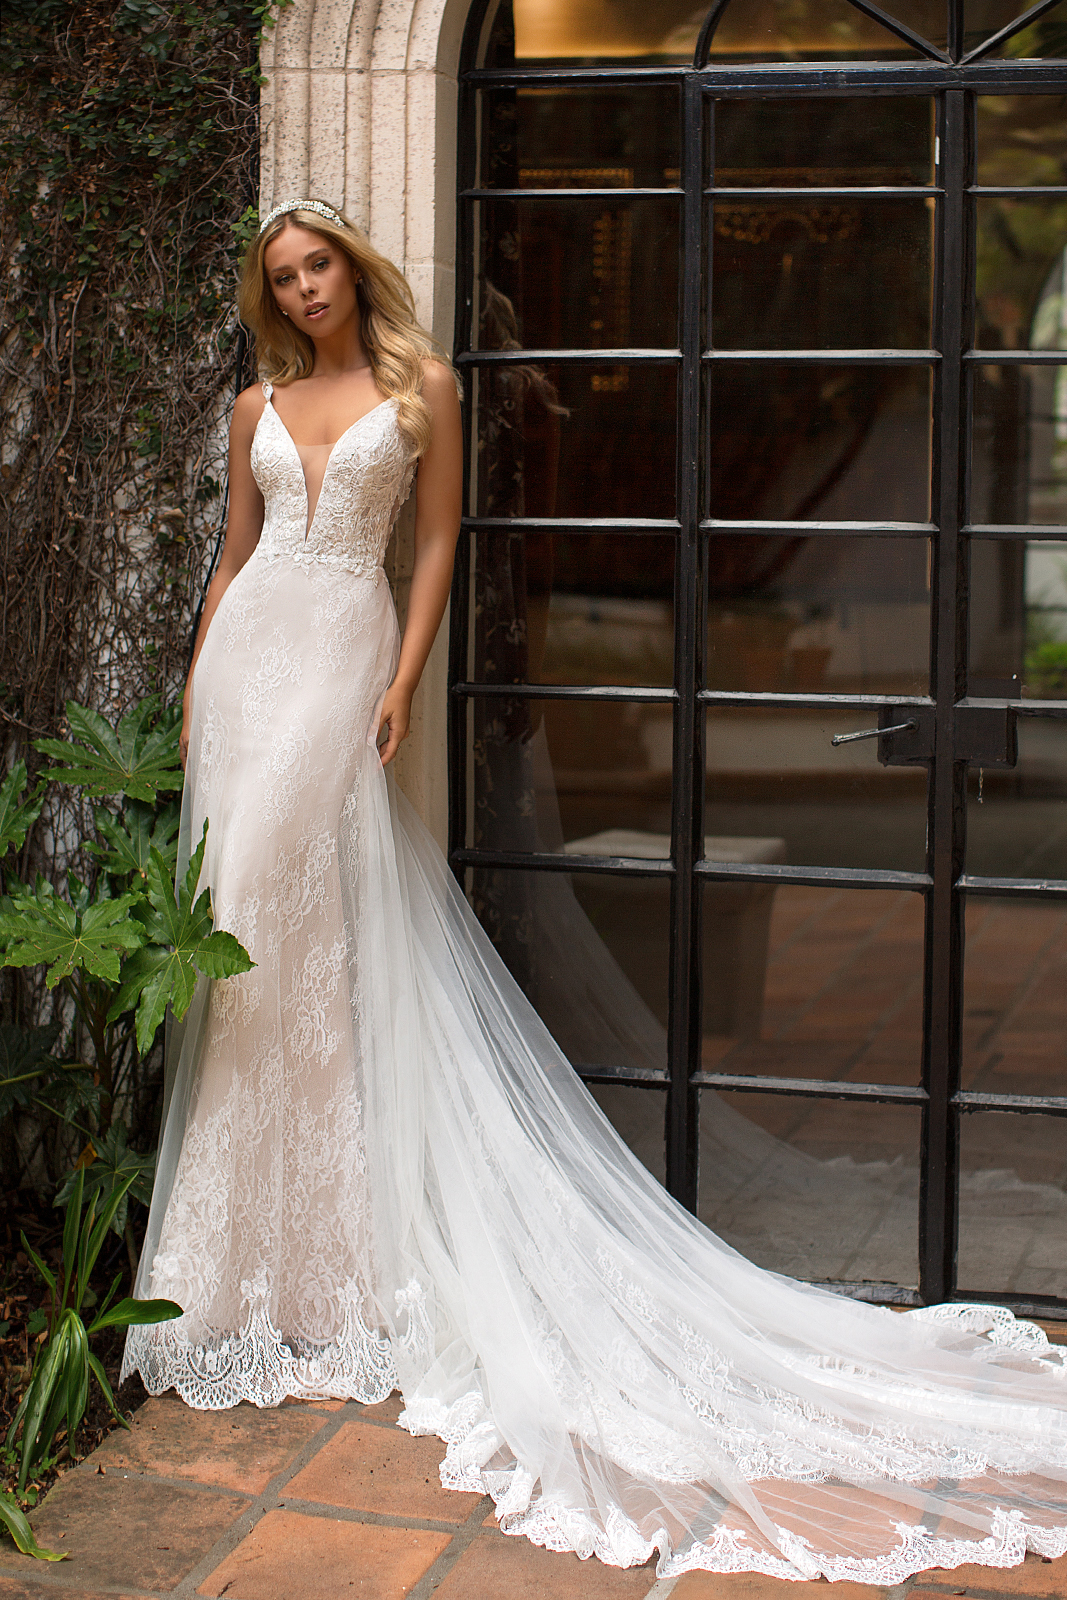 6 Modern Wedding Dress Trends You Will Love – Moonlight Collection 7